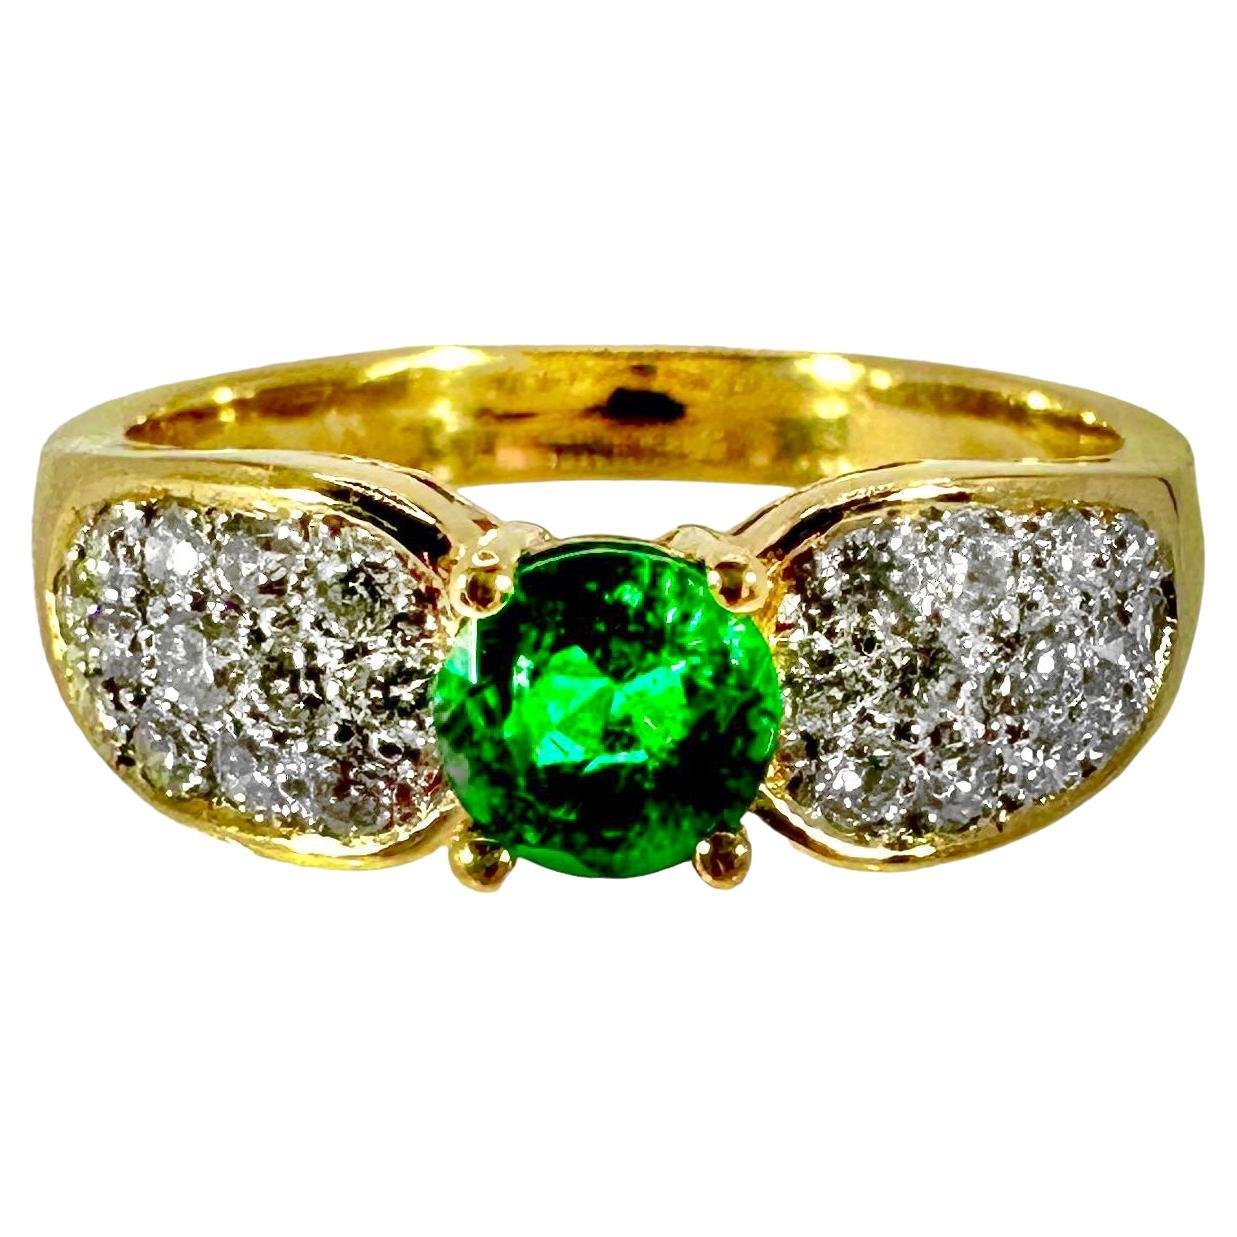 This lovely, traditional ladies fashion ring is set with one vibrant natural emerald having an exact weight of .53ct. This center stone is flanked by a total of 26 brilliant cut diamonds which have a total exact weight of .39ct and an overall